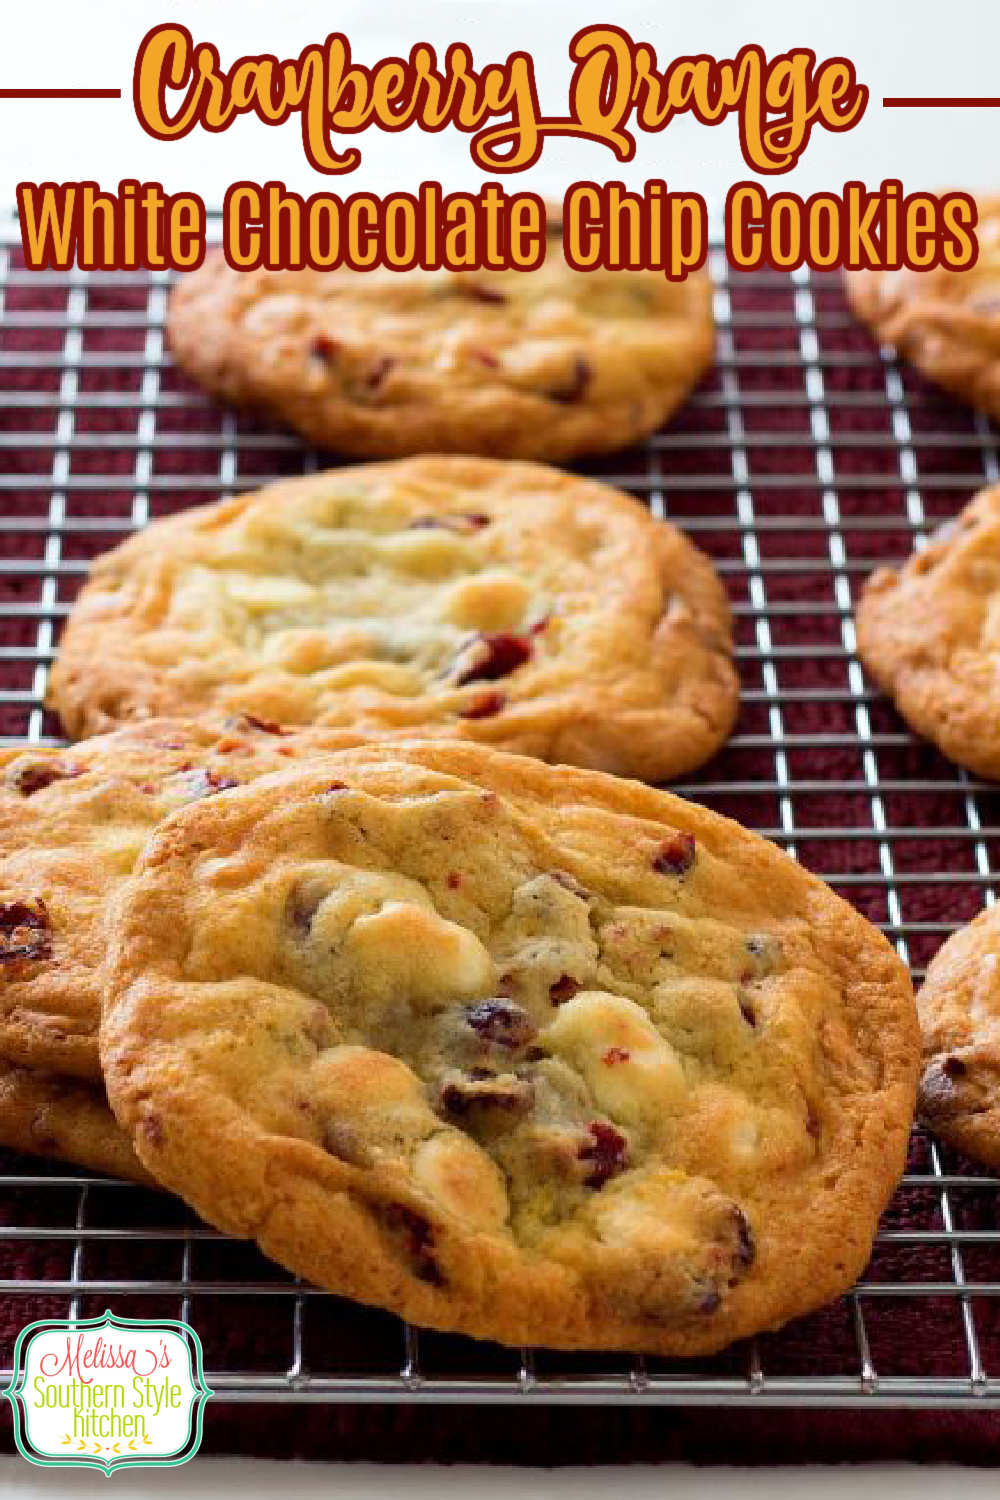 These buttery cookies are infused with the flavors of cranberry and orange zest and filled with creamy white chocolate chips #cranberrycookies #cranberryorange #cookies #cookierecipes #baking #holidaybaking #branberry #whitechocolatechipcookies #whitechocolate #christmascookies